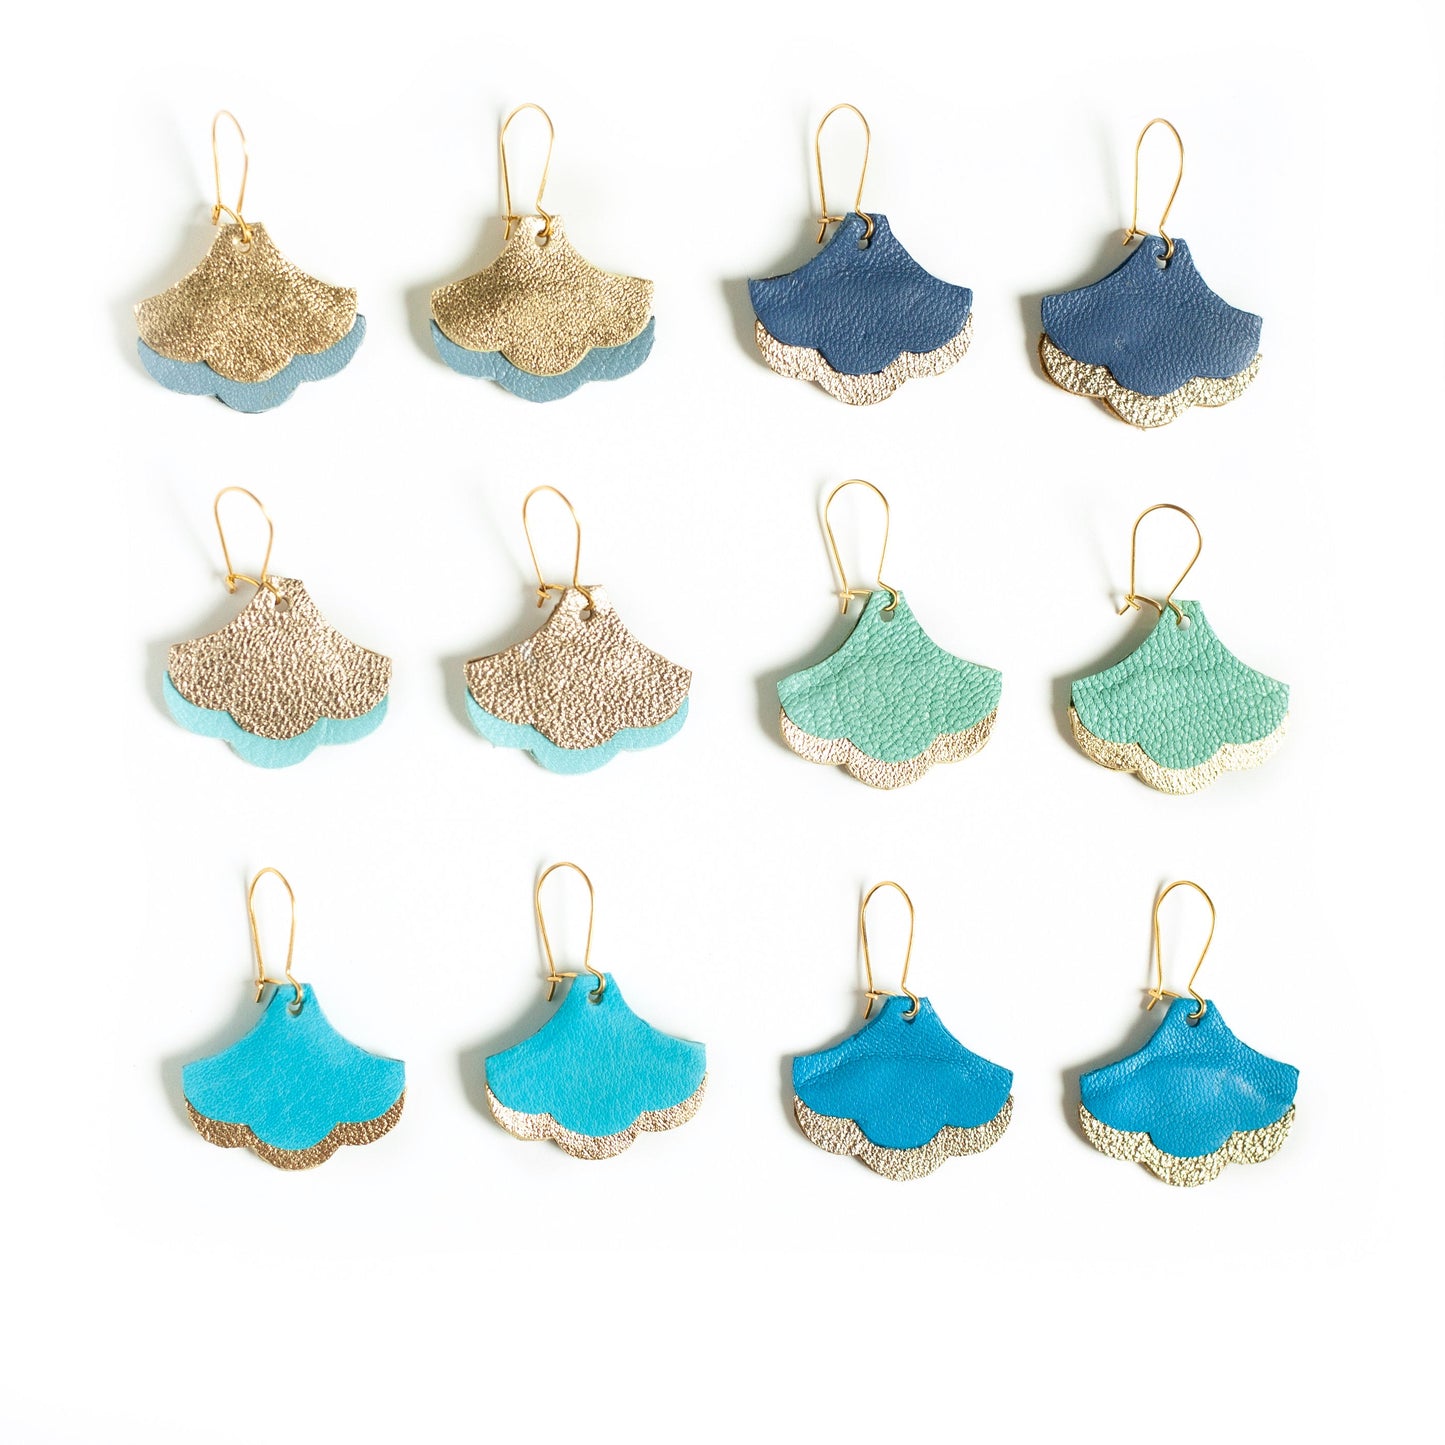 Ginkgo Biloba earrings in azure blue and gold leather